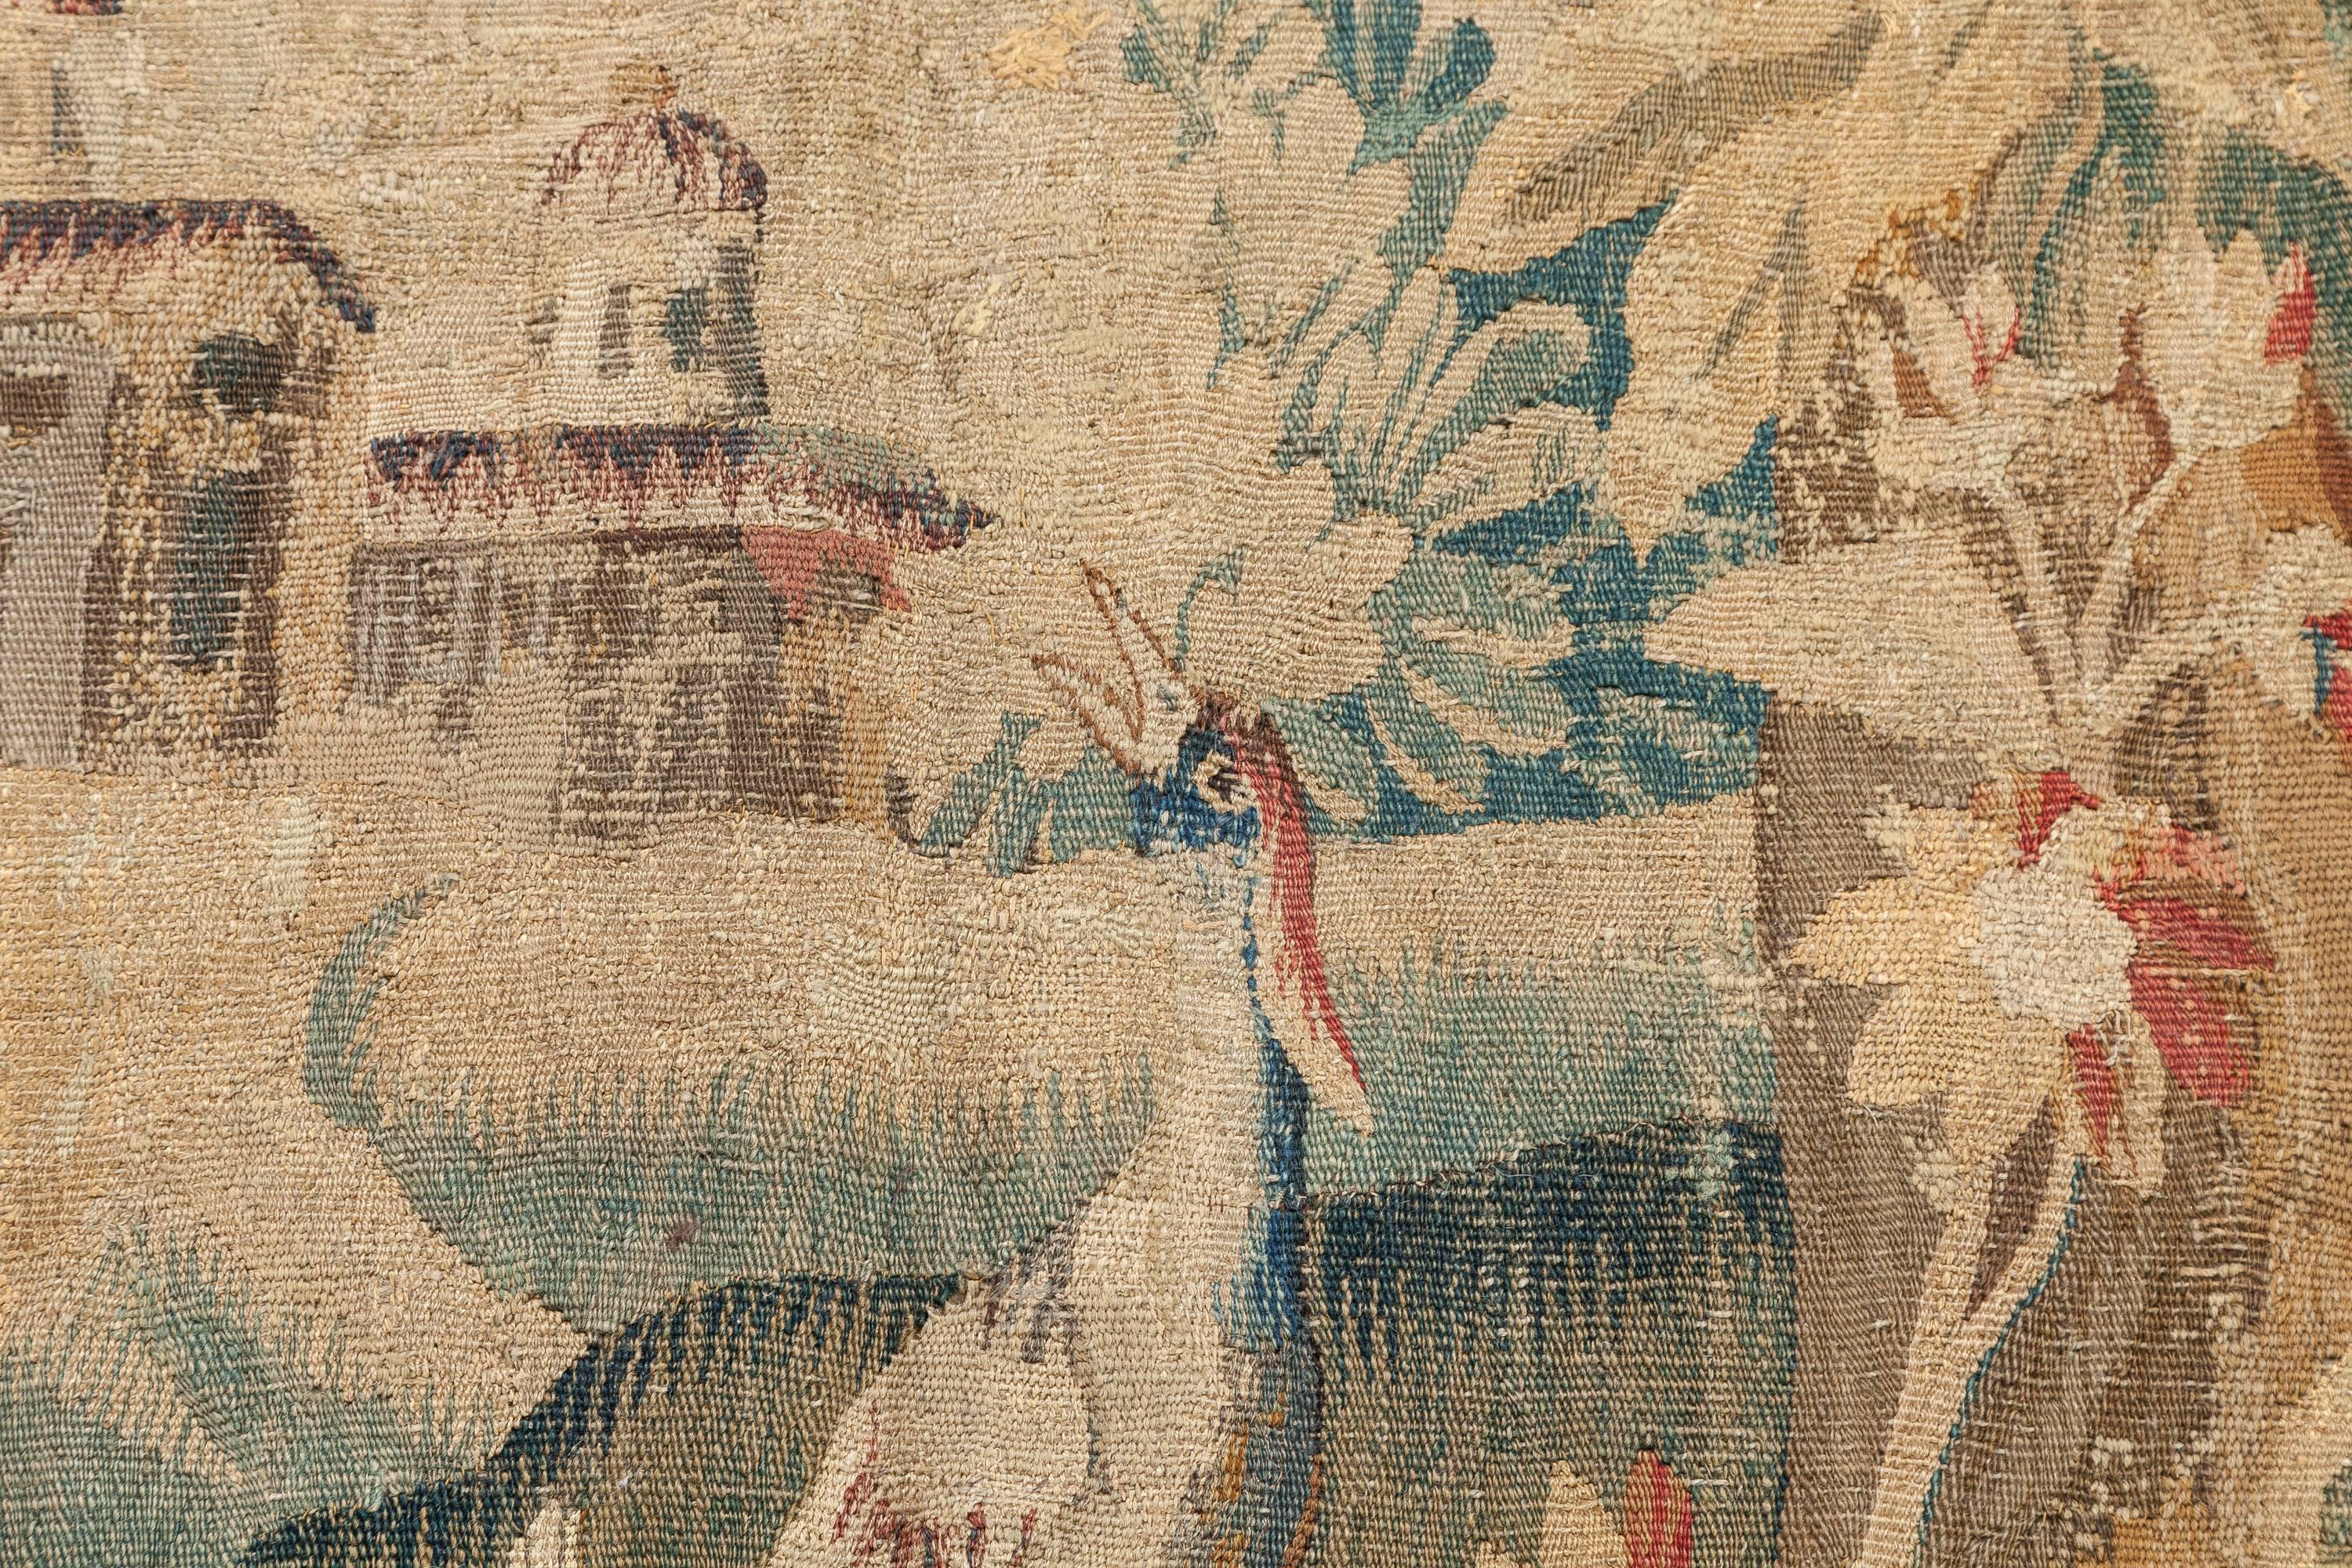 A hand-loomed landscape with stream tapestry from Aubusson, France dating to the late 17th century. A particularly interesting and beautiful composition.